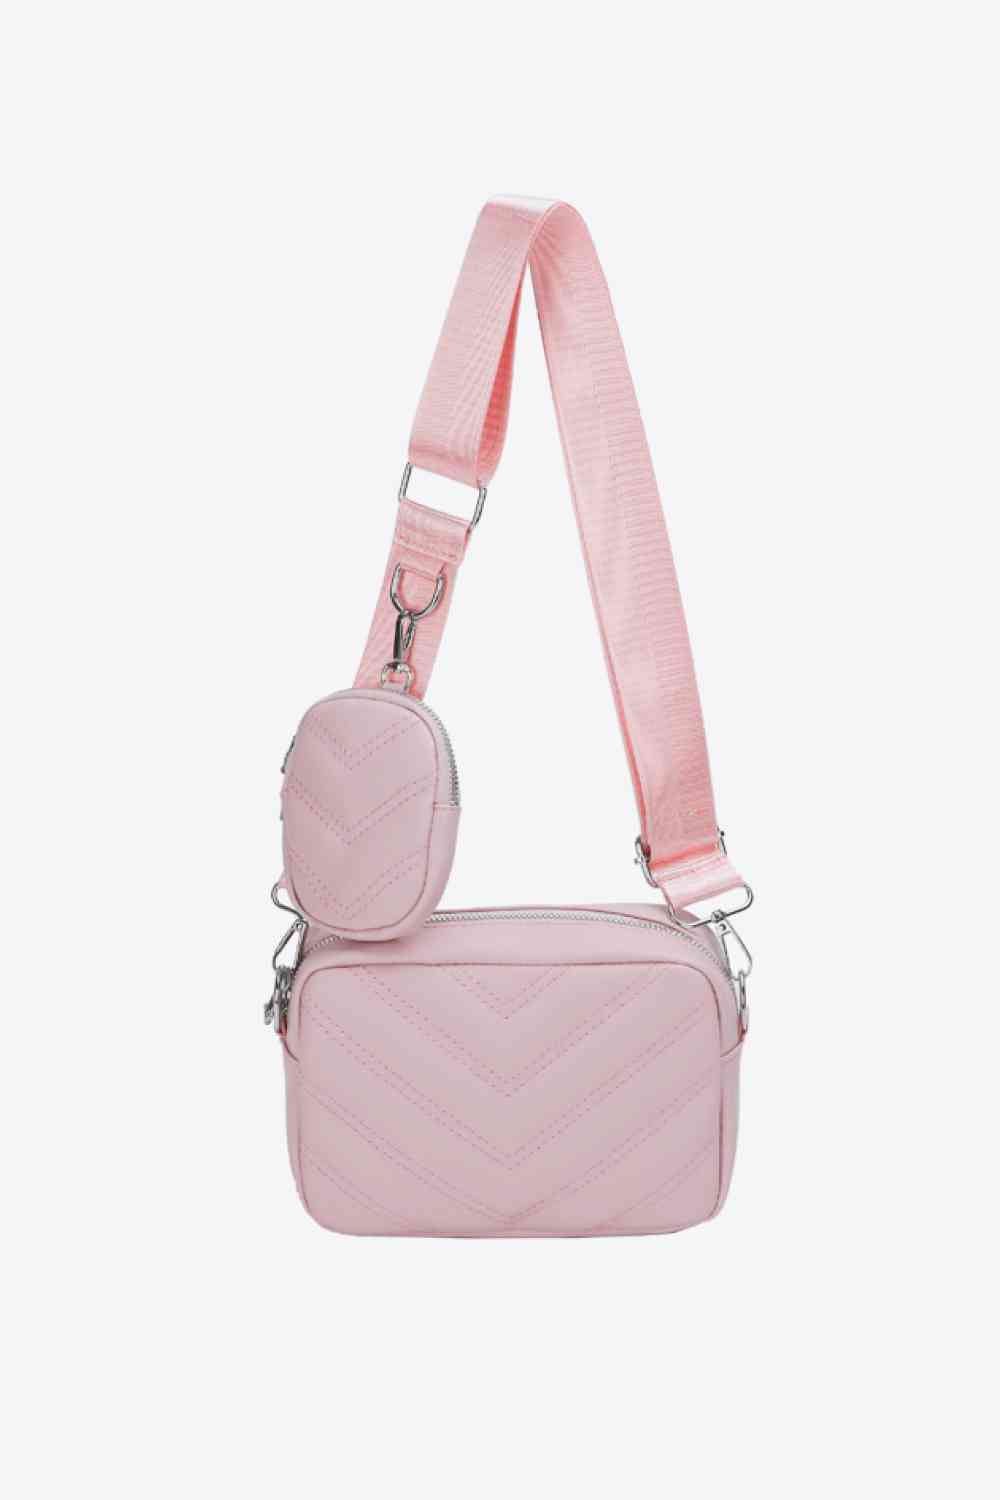 Adored PU Leather Shoulder Bag with Small Purse - Just Enuff Sexy